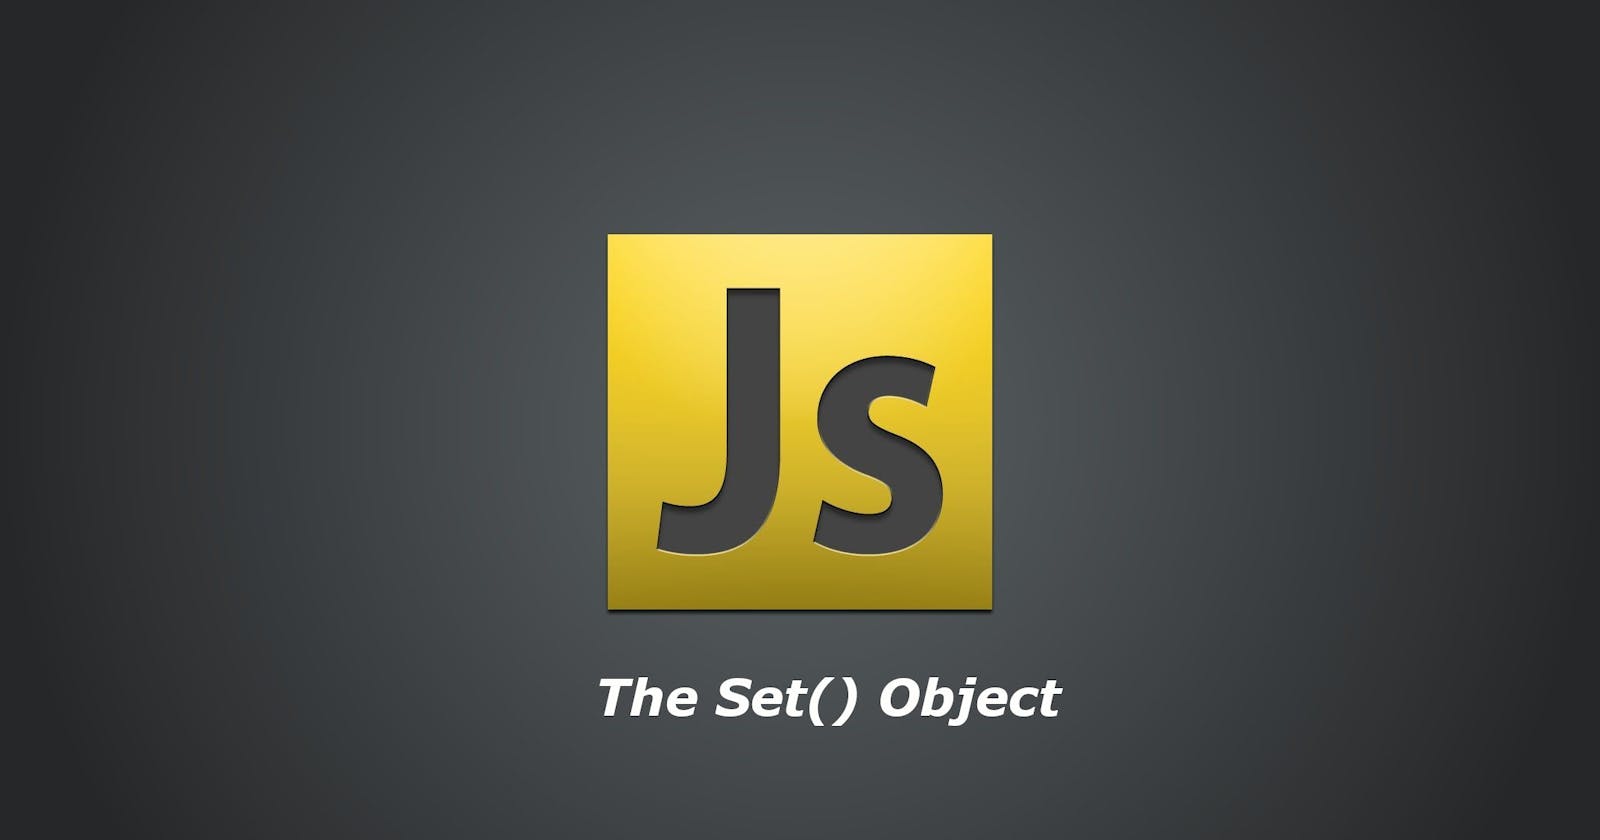 The Set() Object in JavaScript - A Nimble Introduction